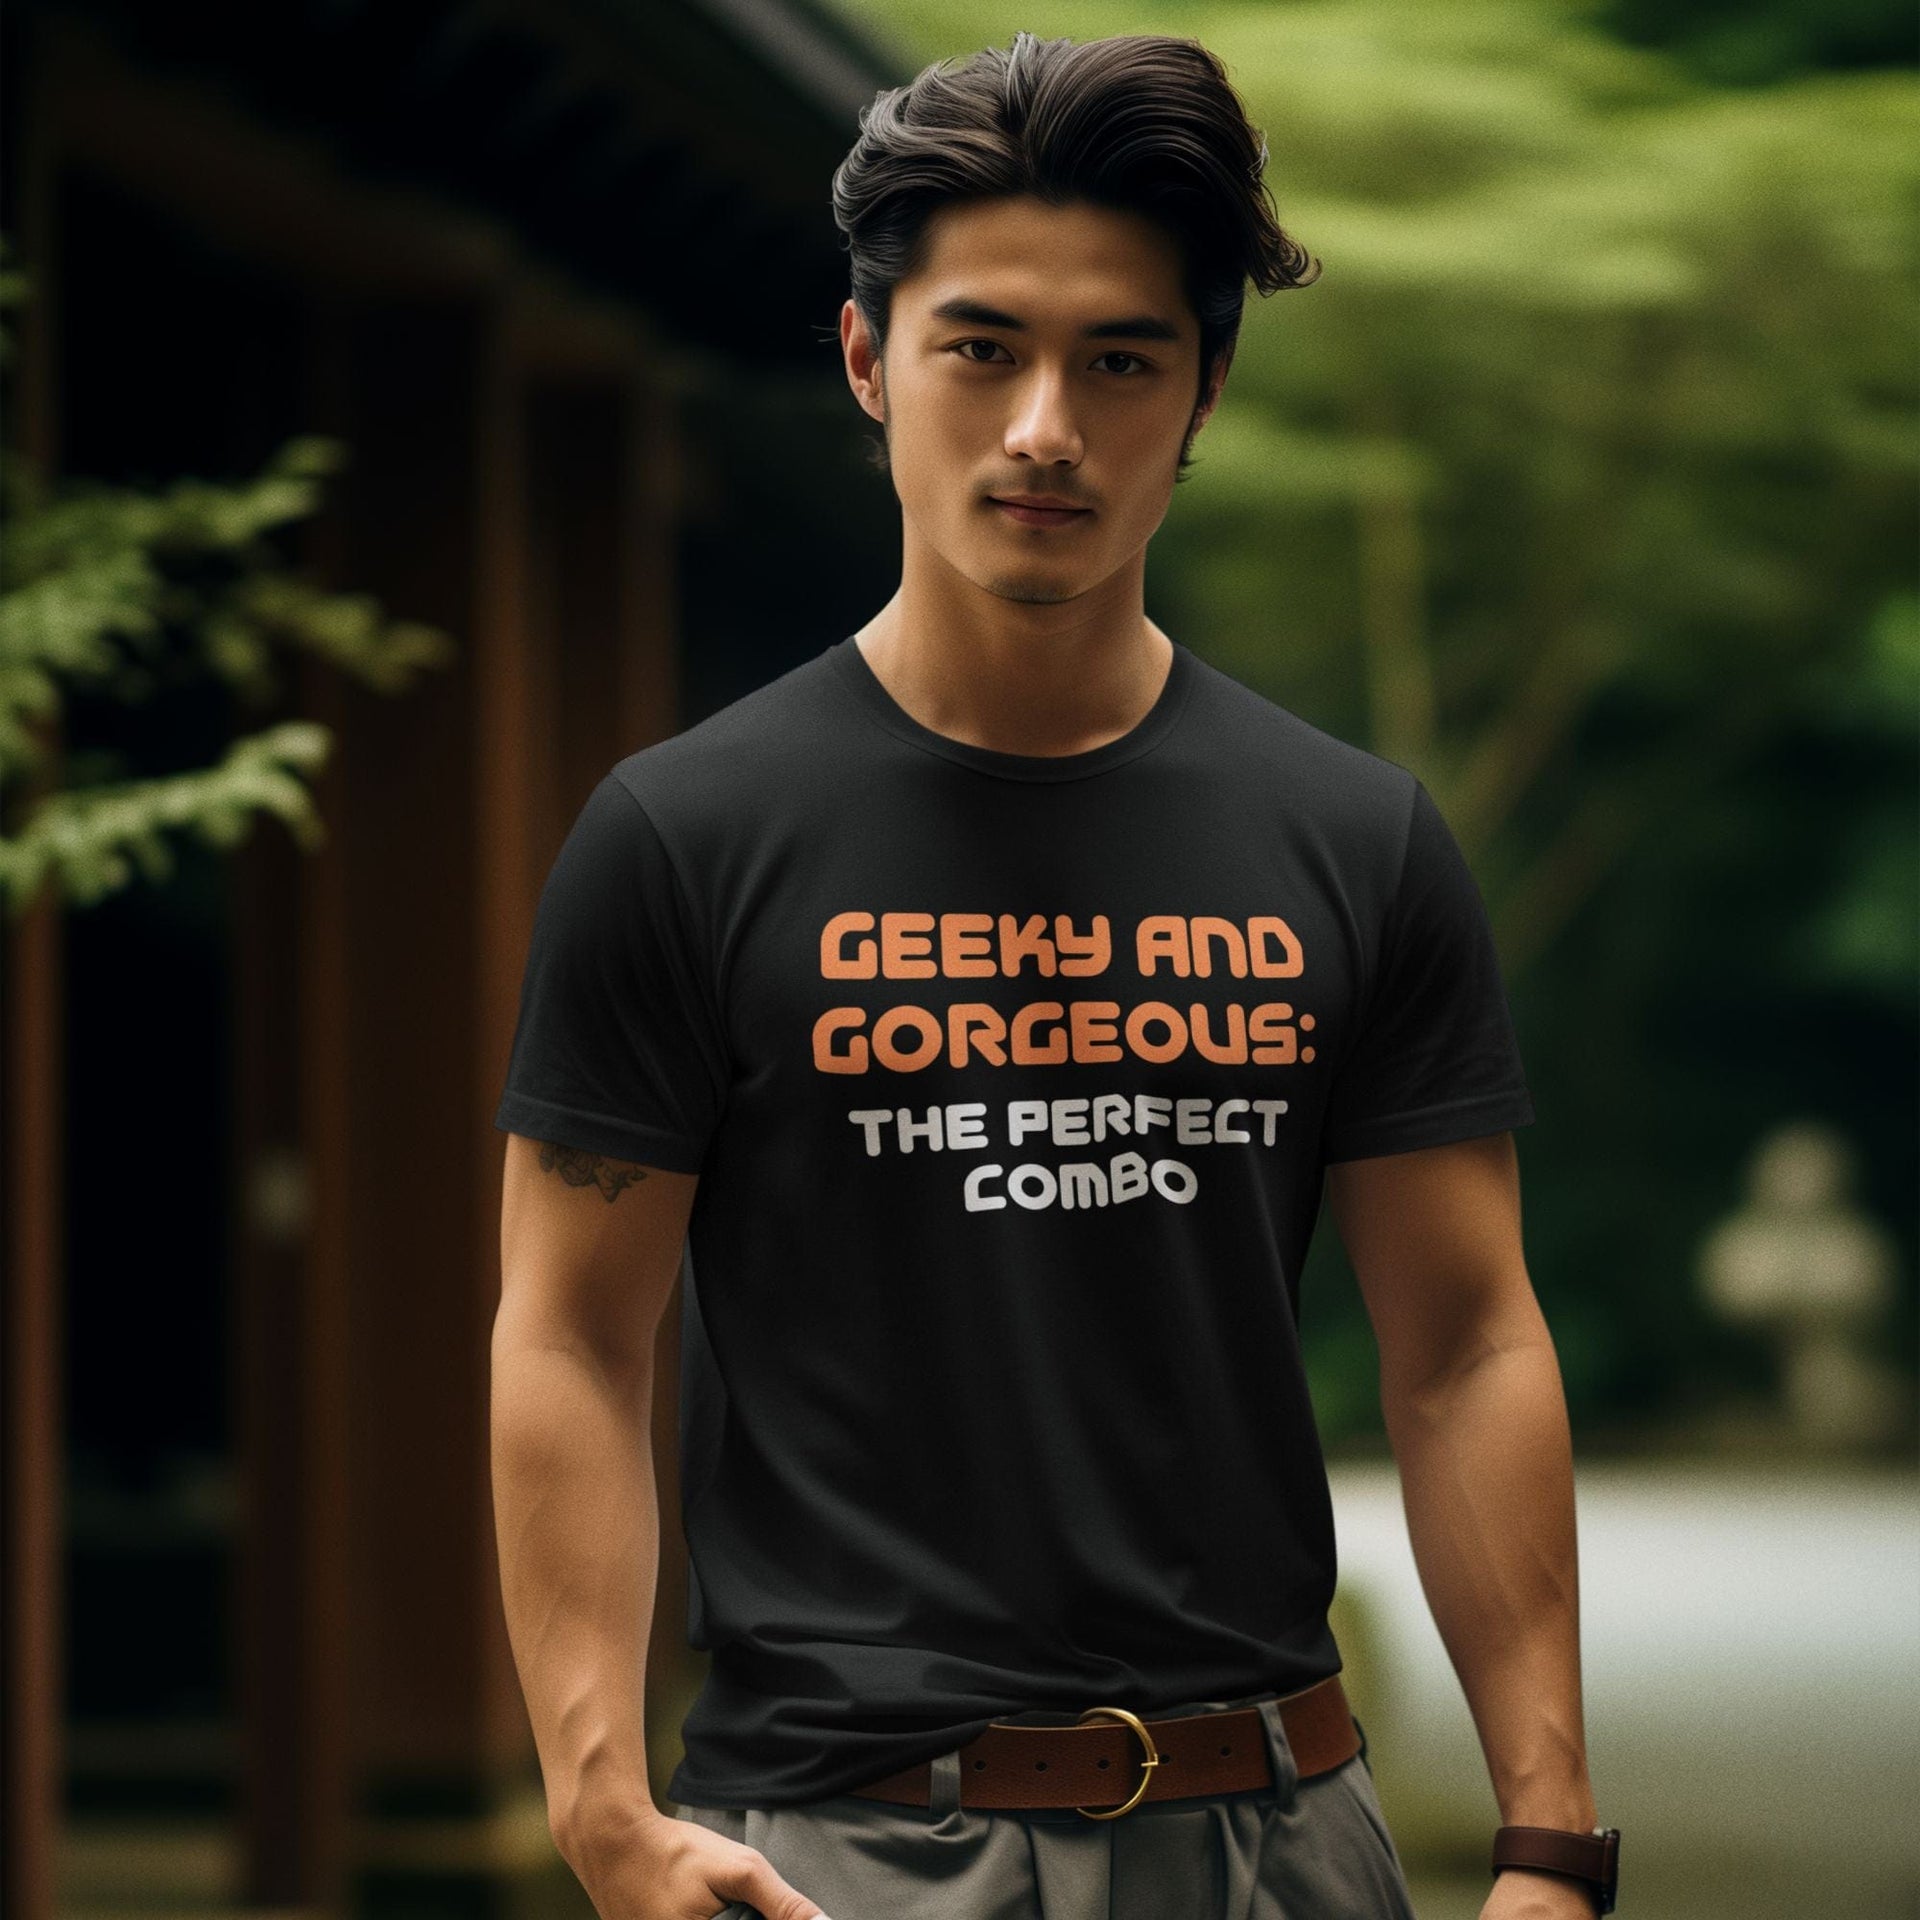 Geeky and Gorgeous: The Perfect Combo - Men's T-Shirt